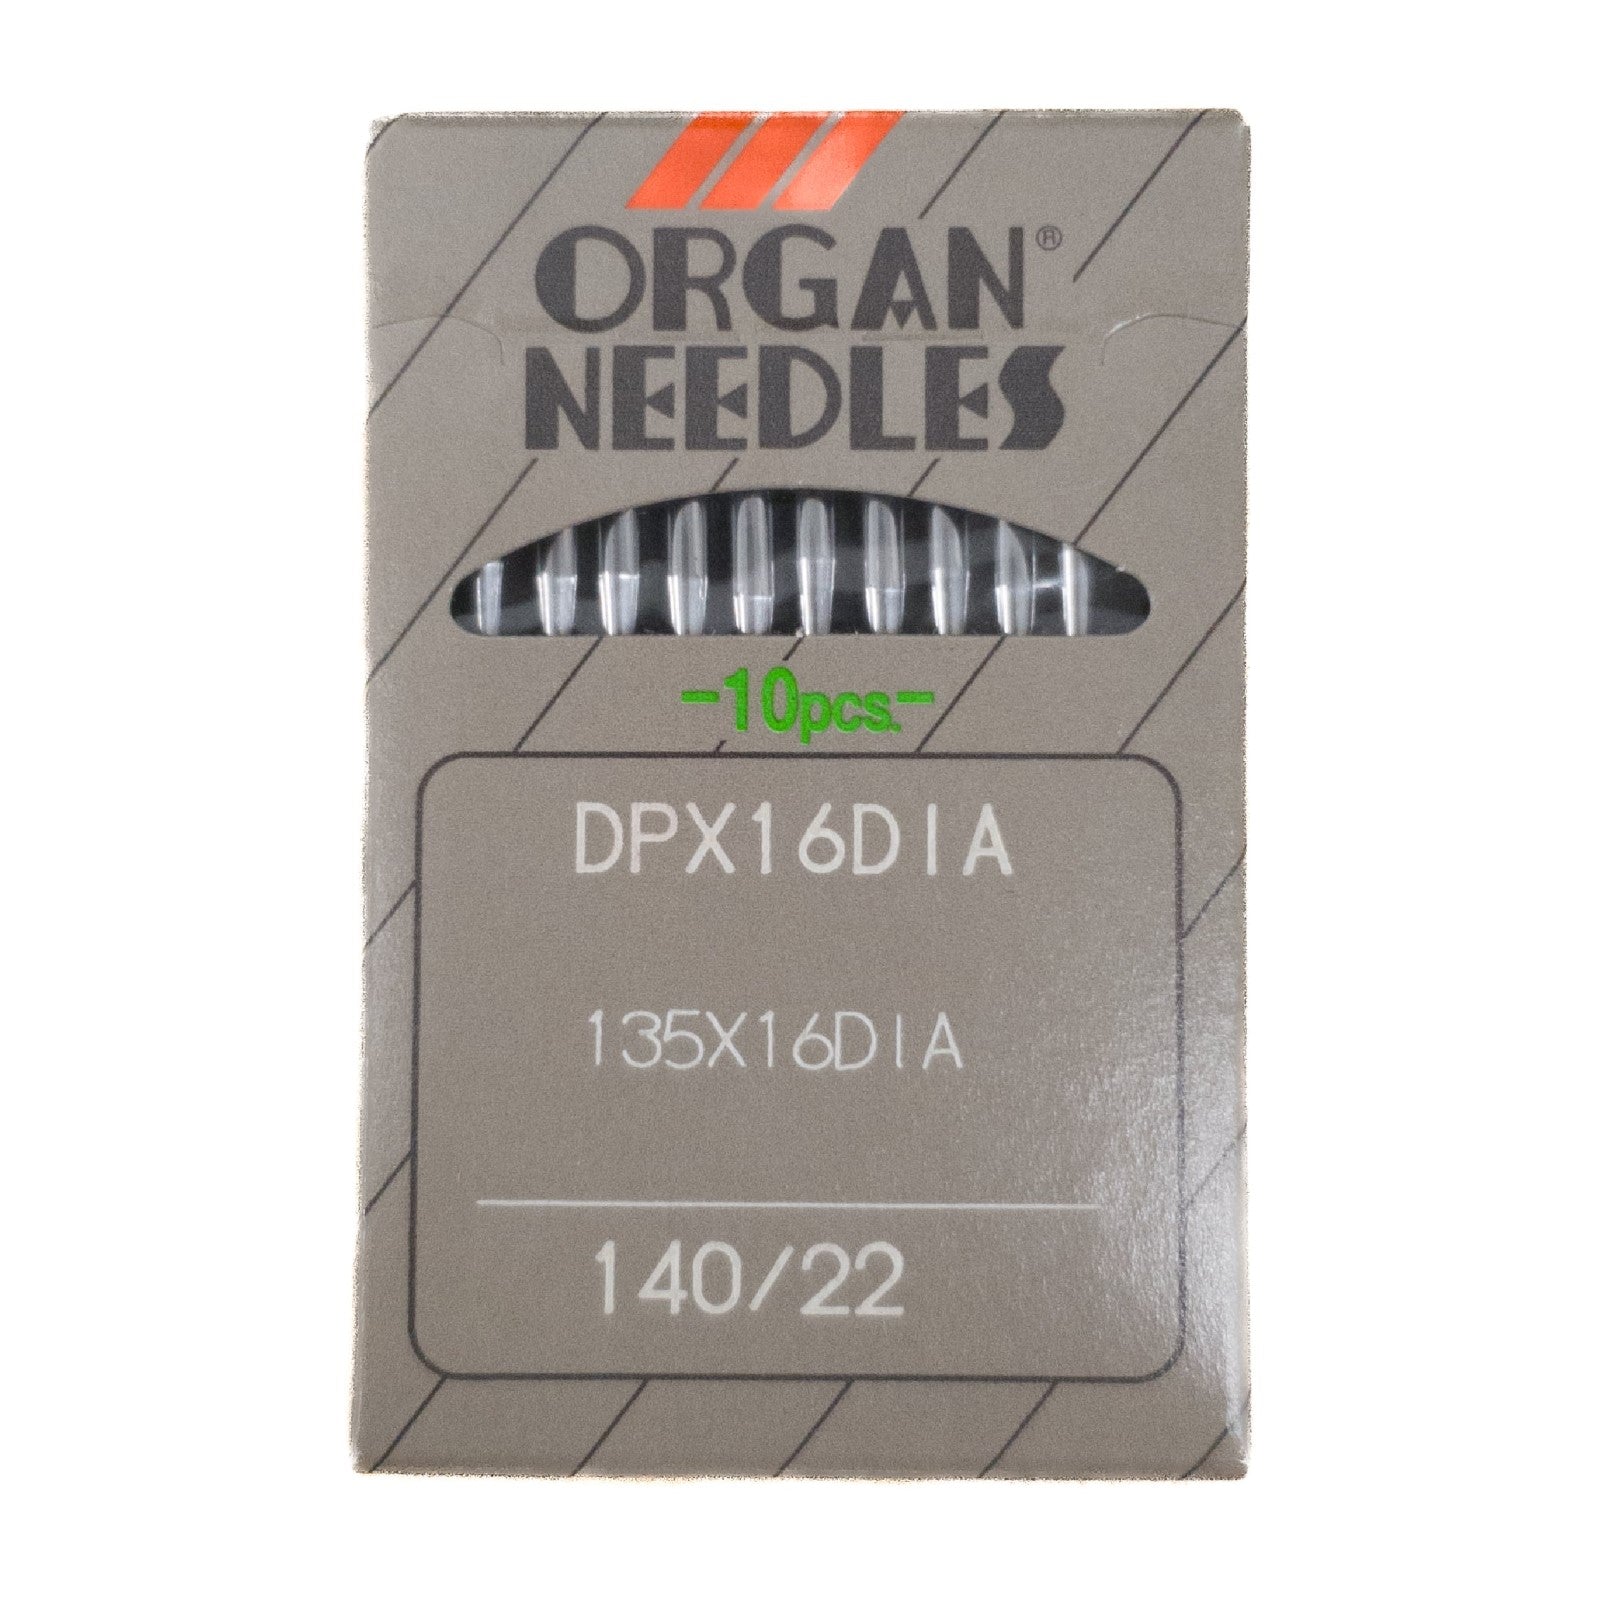 Industrial Sewing Machine Needles, Organ Needles 140/22 | The Leather Guy